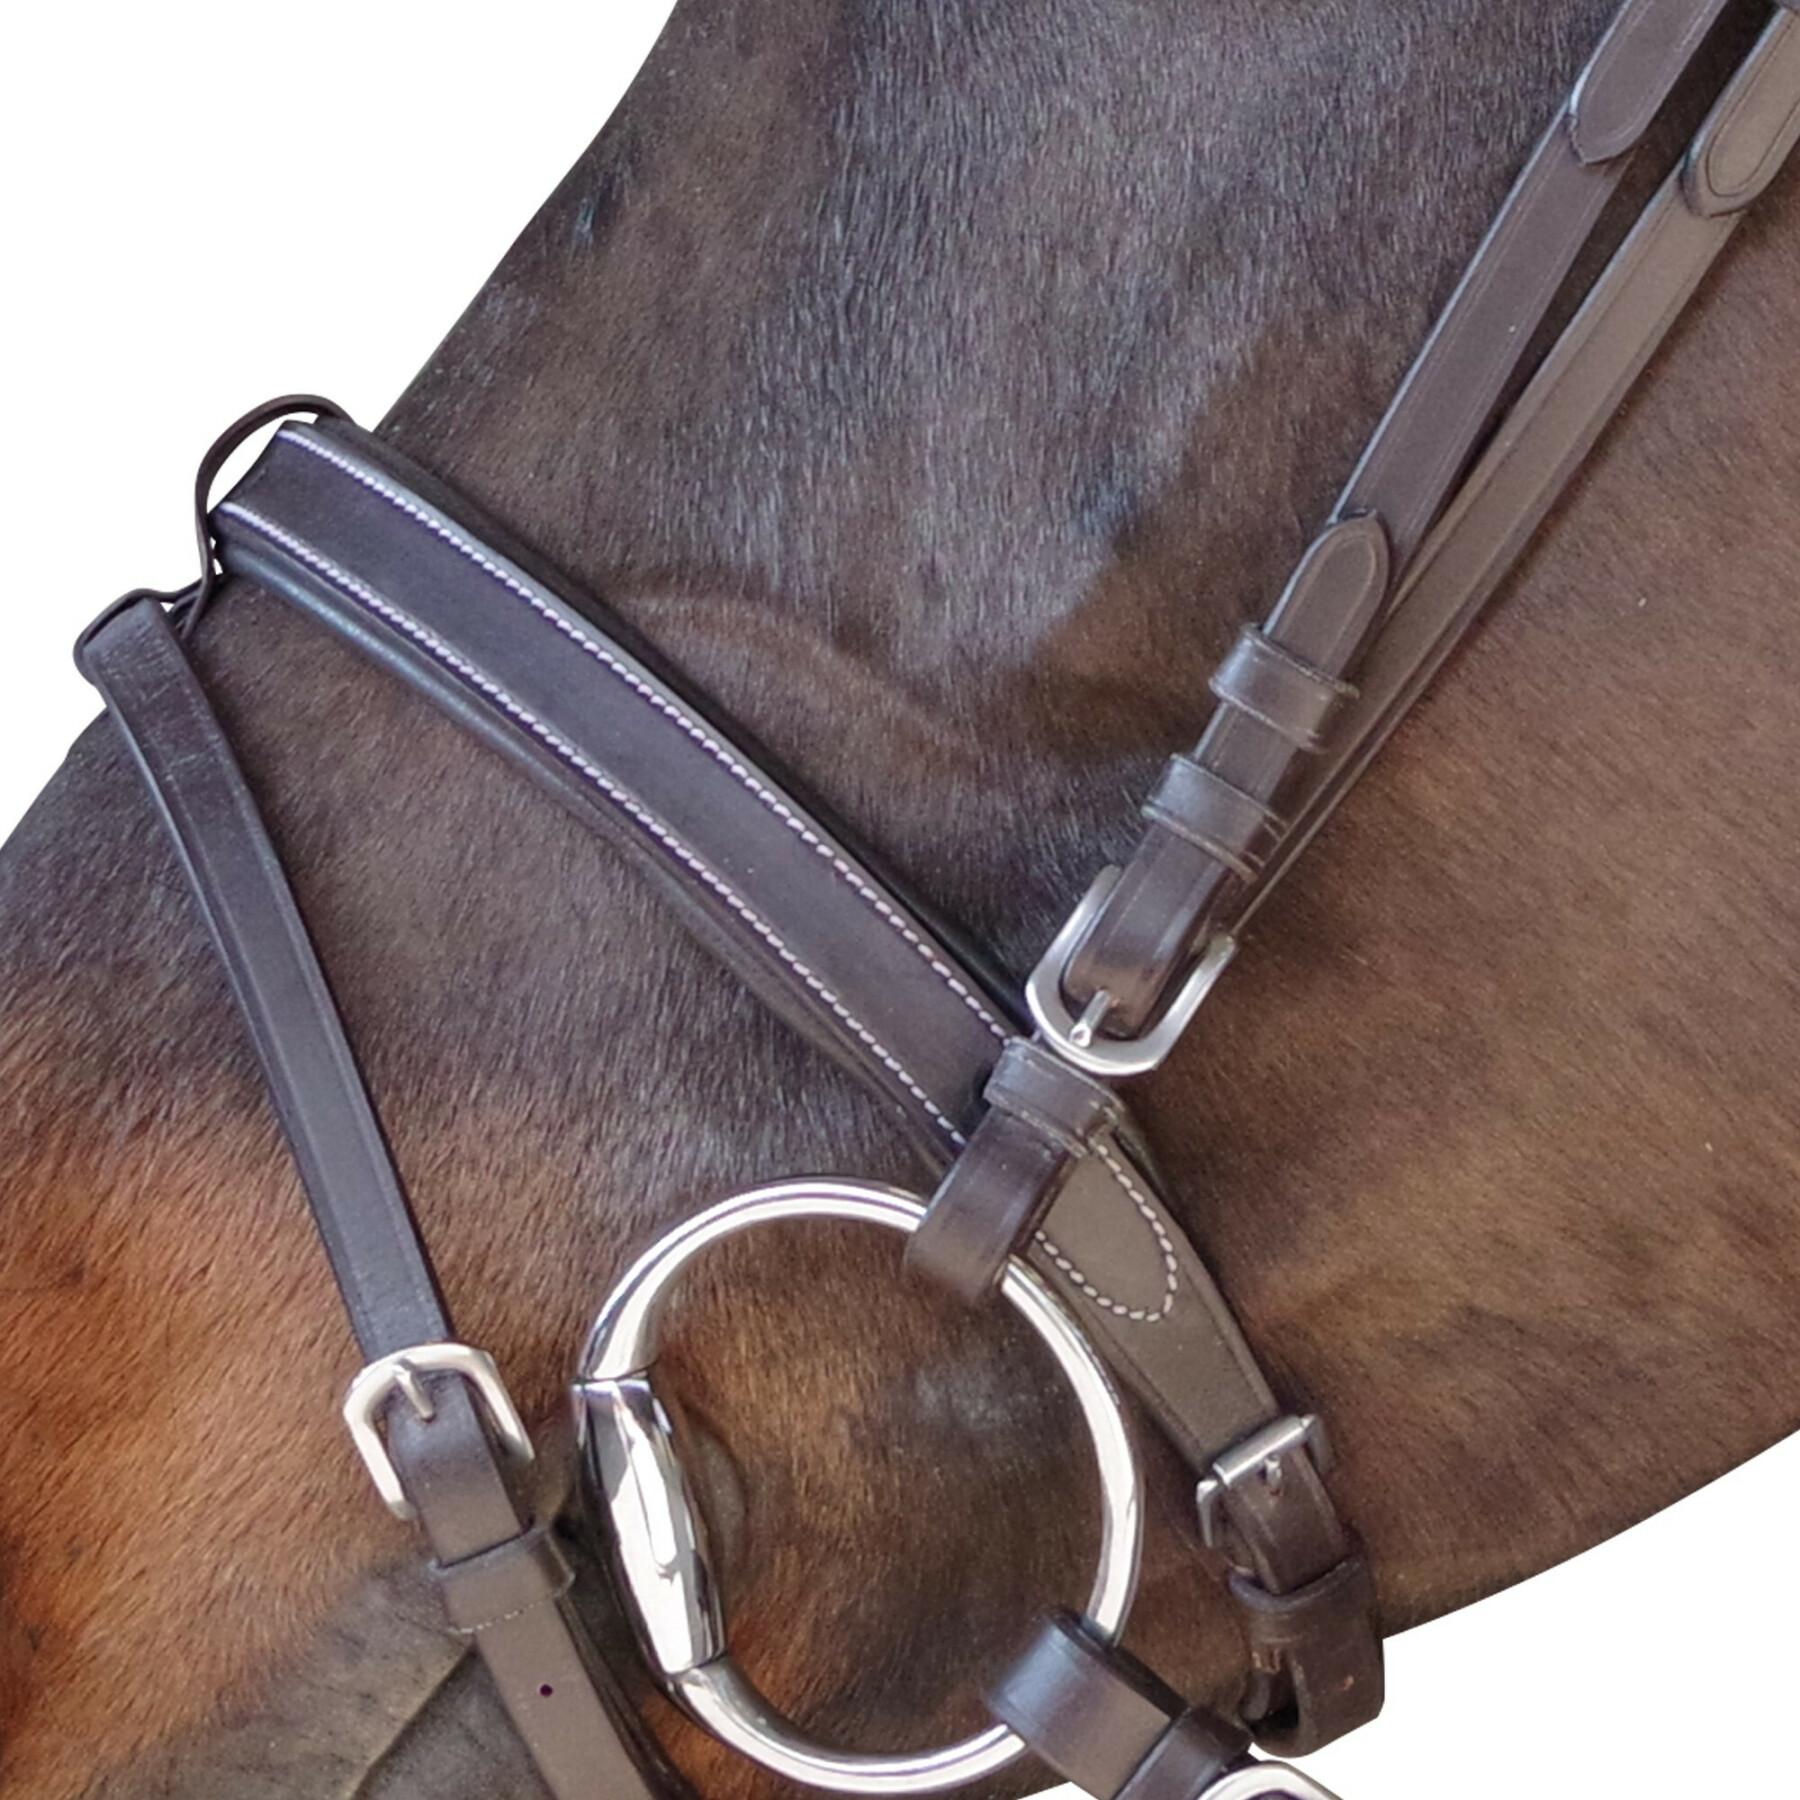 Bridle flat lined Canter